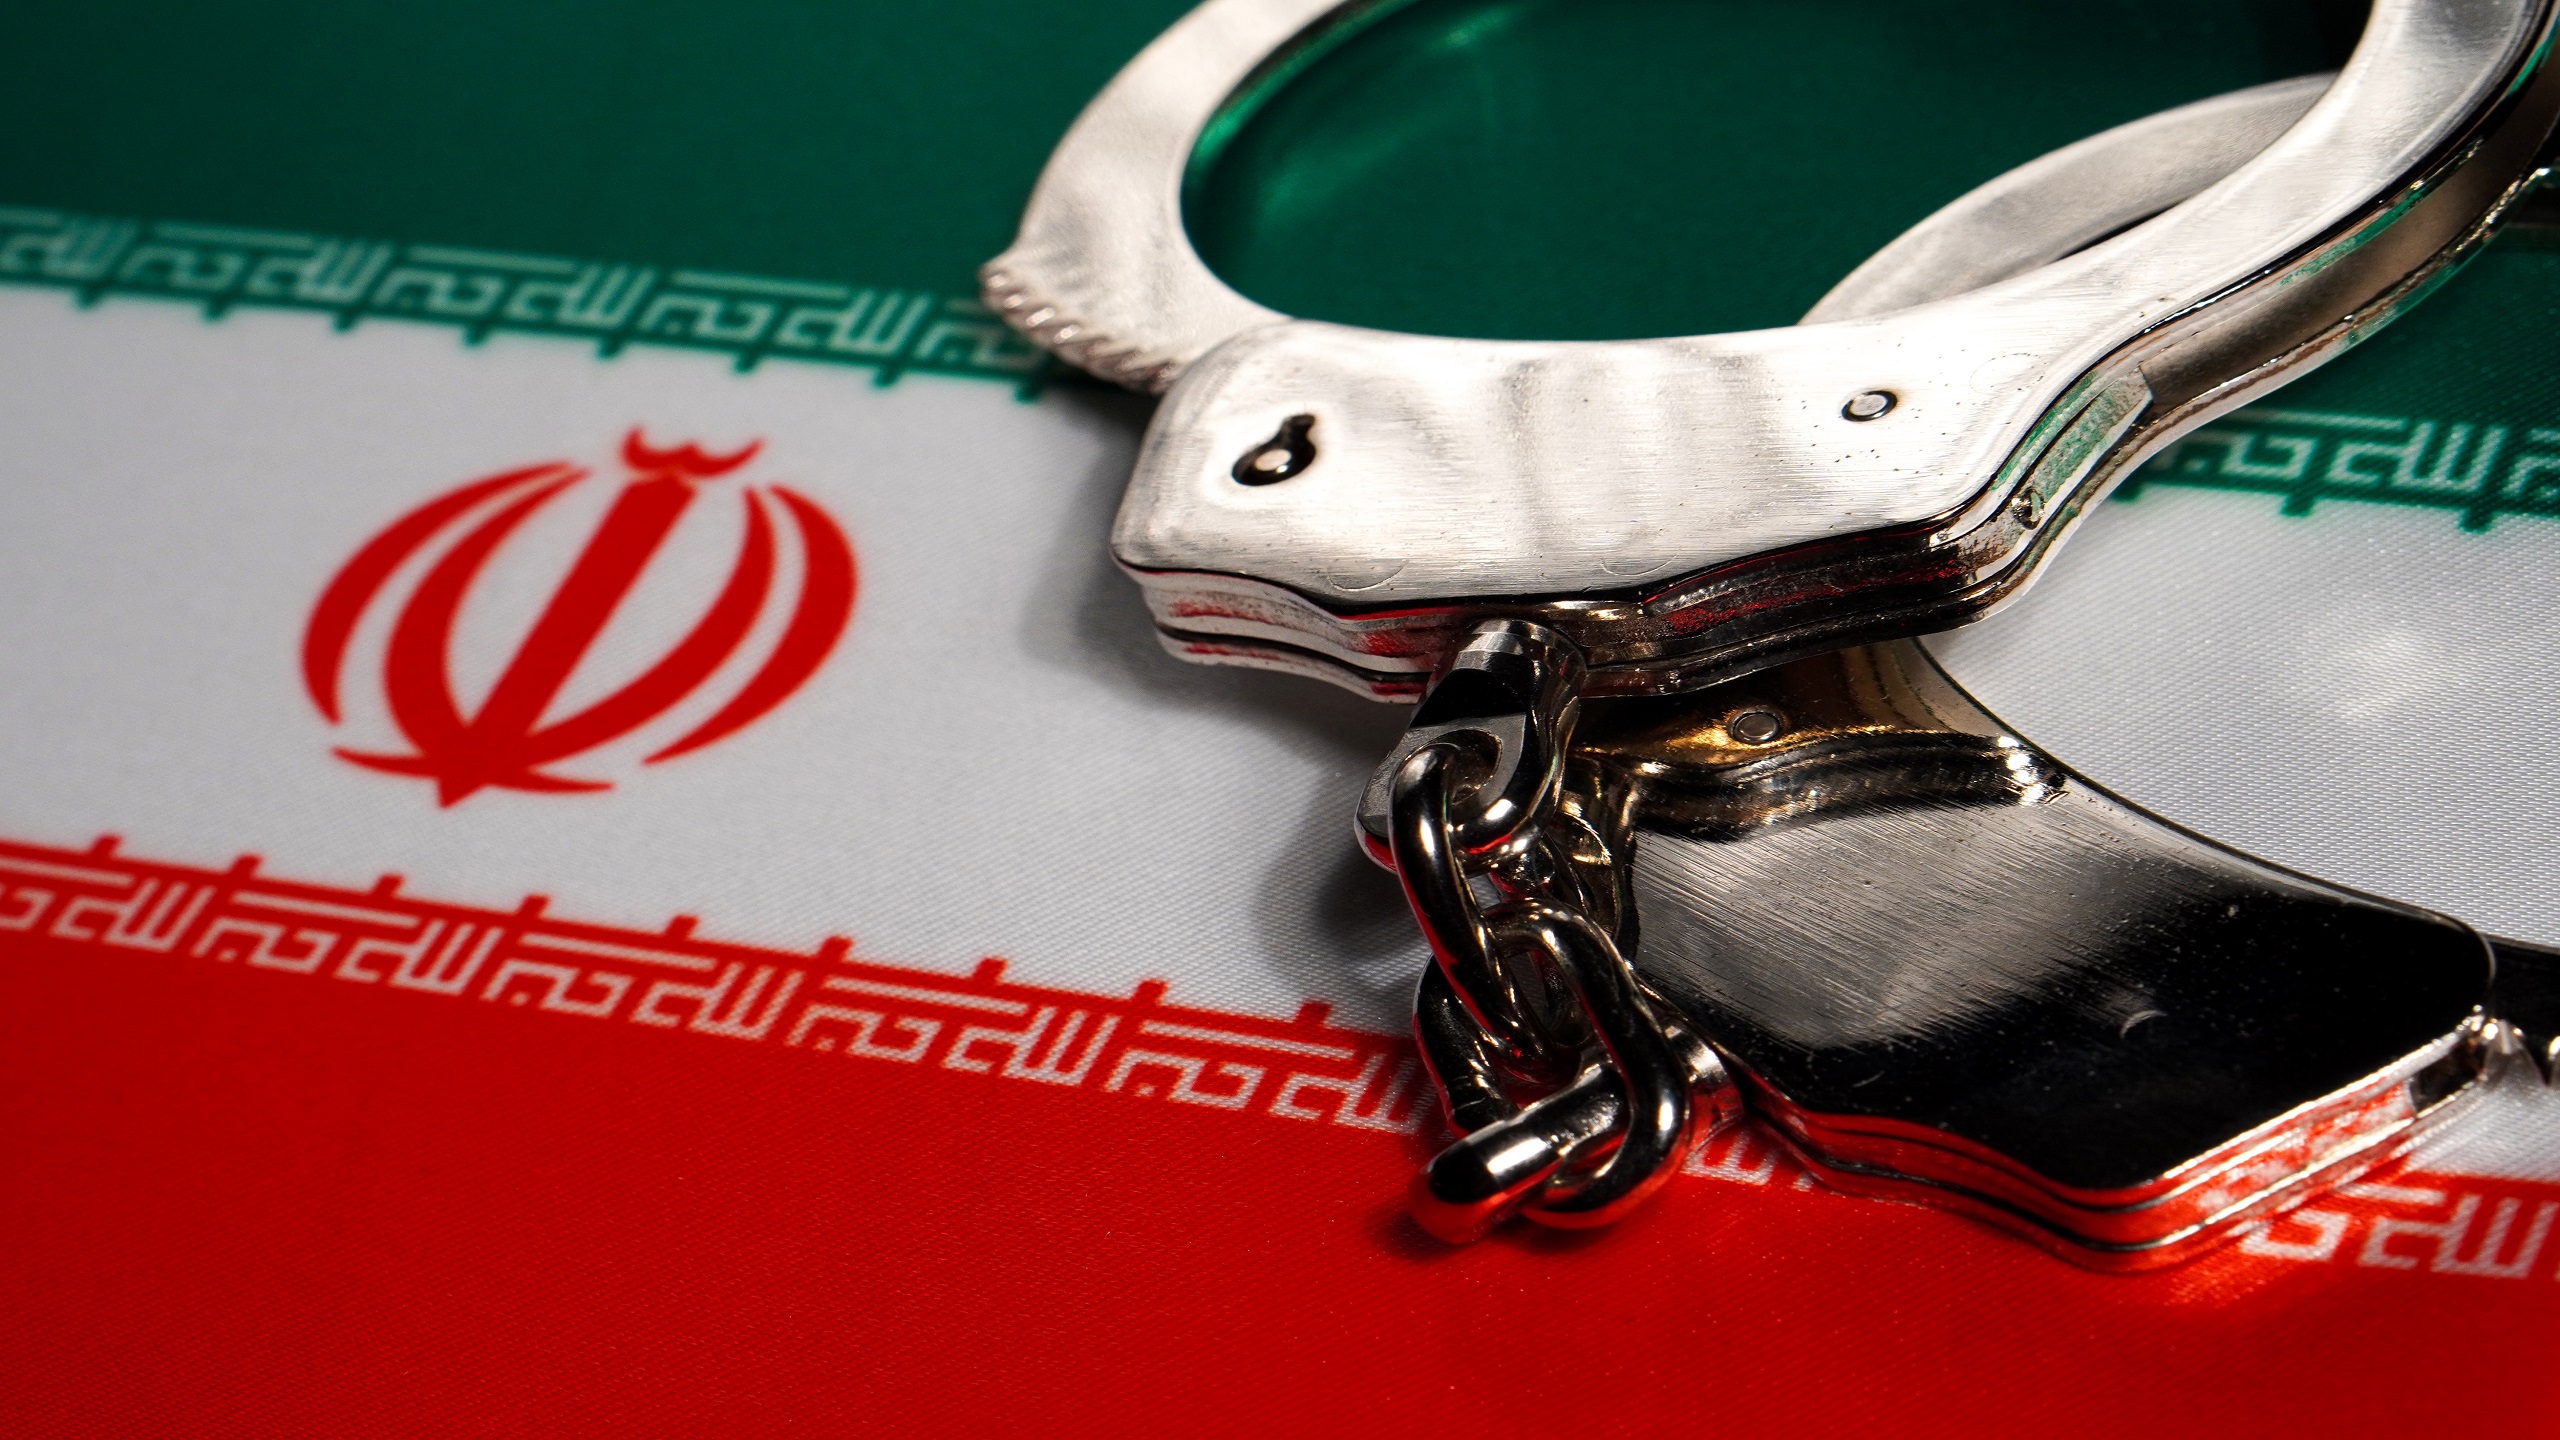 Iran Arrests Suspects in Connection to Student Poisonings Across 5 Provinces